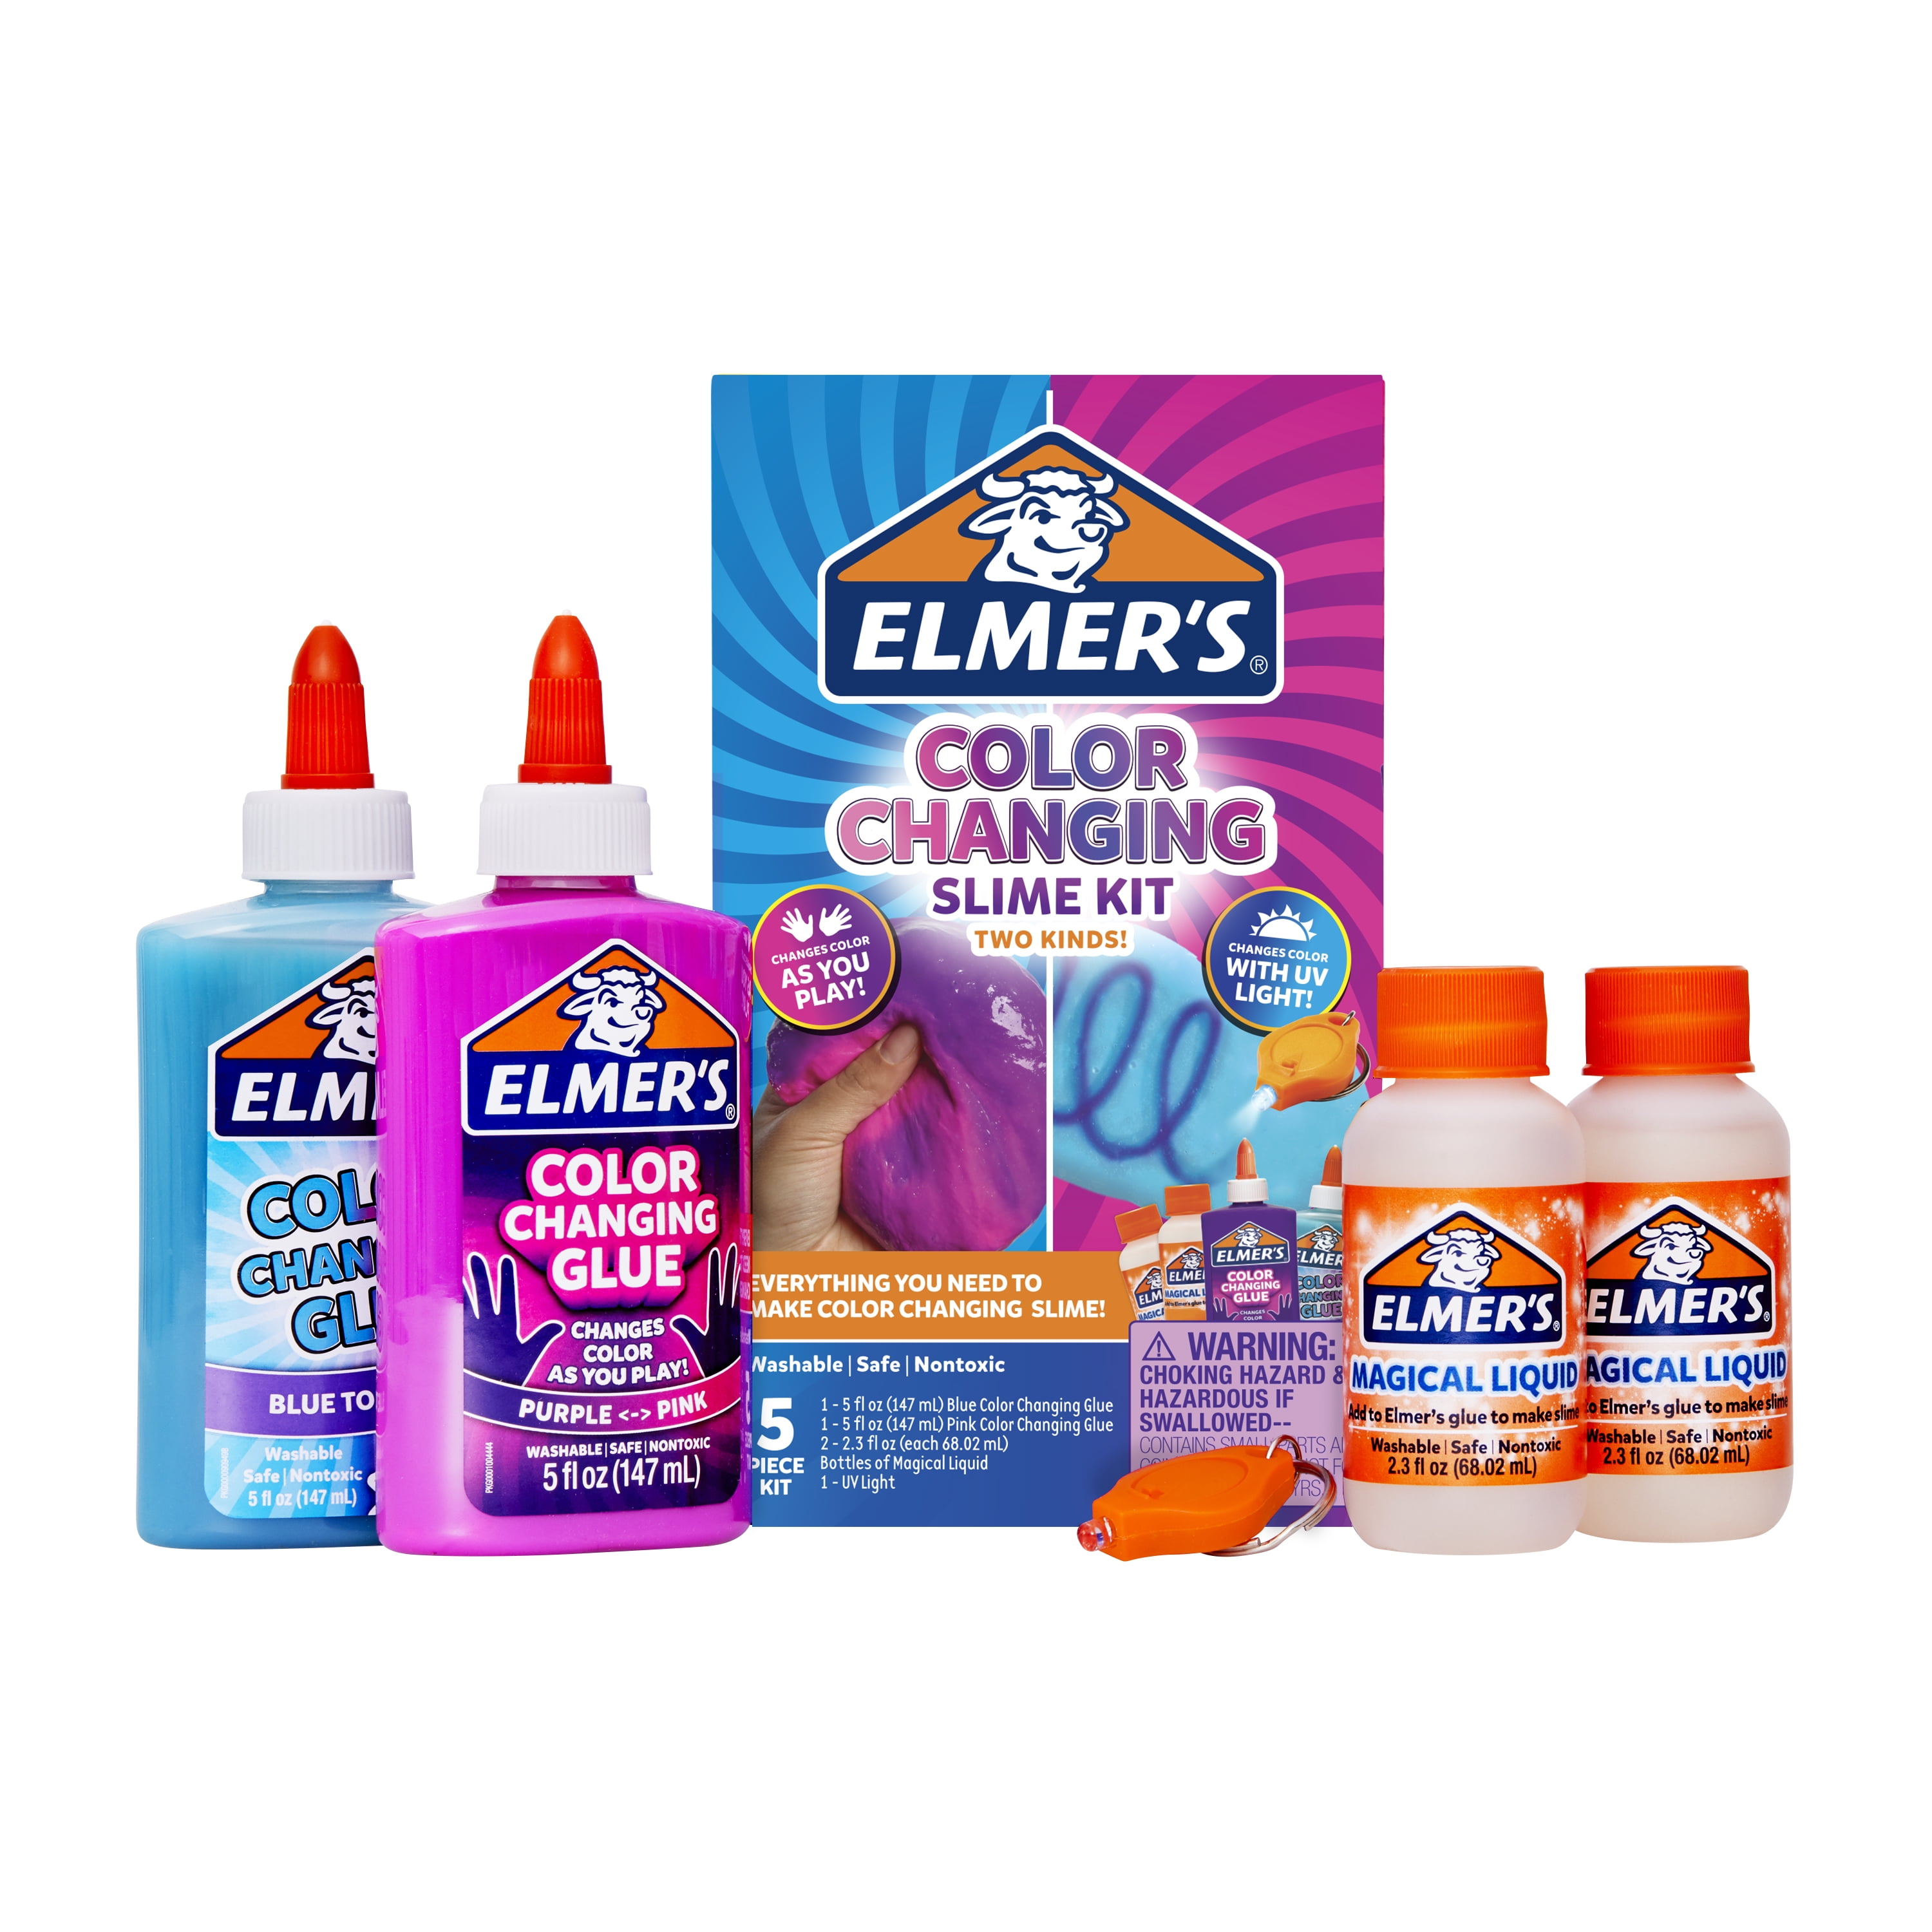 How Elmer ALL-STAR SLIME PACK Changed The Game This Year